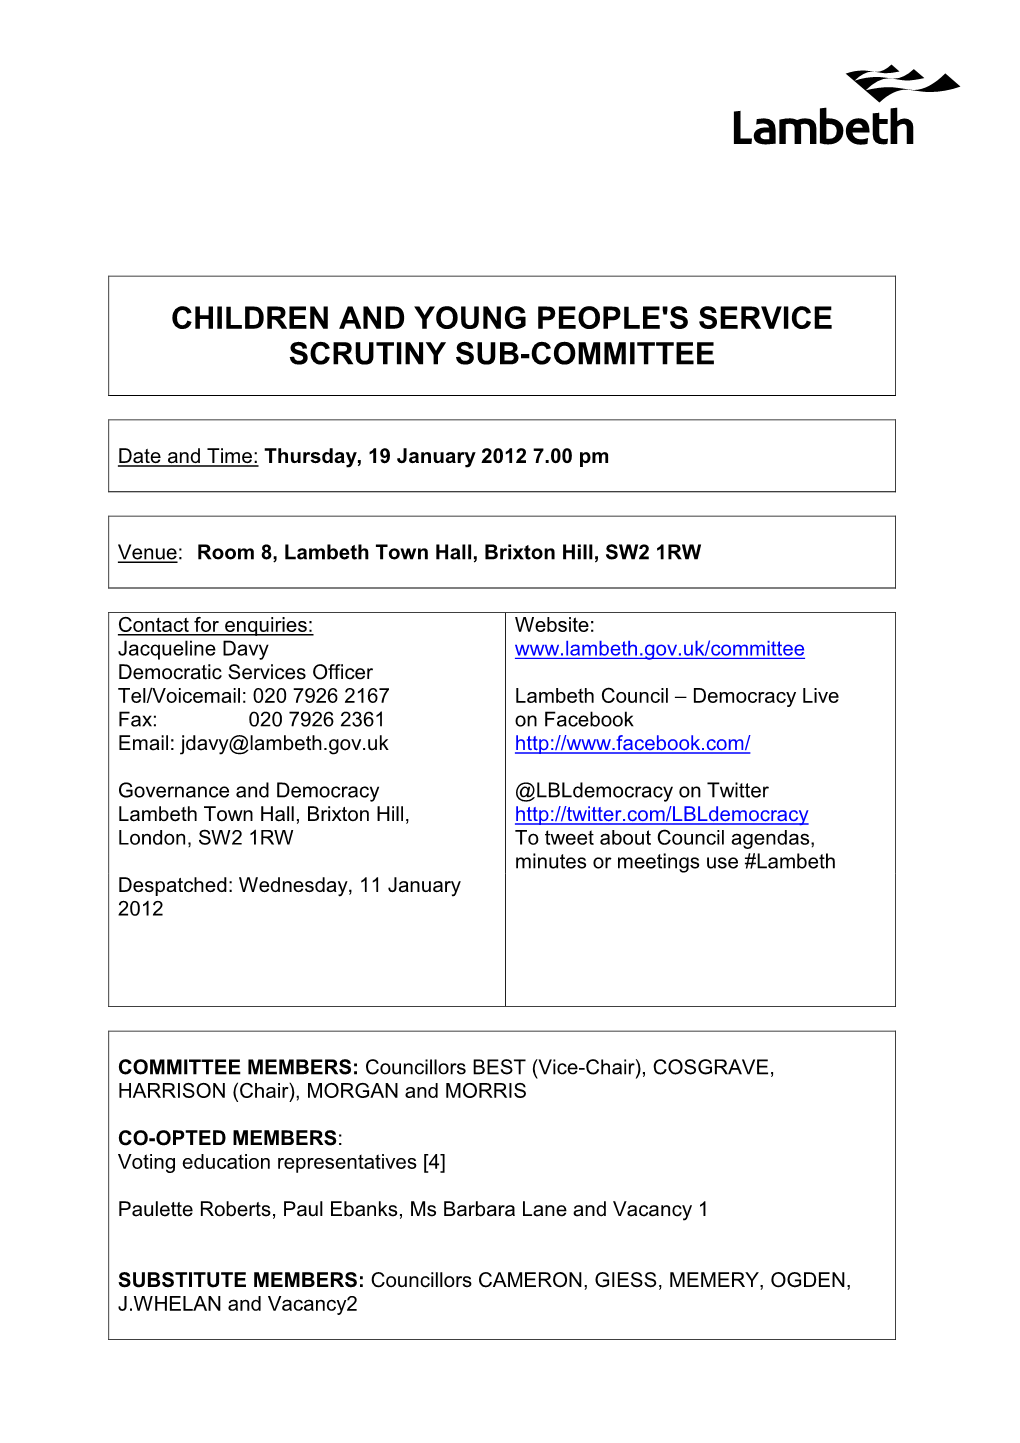 Children and Young People's Service Scrutiny Sub-Committee